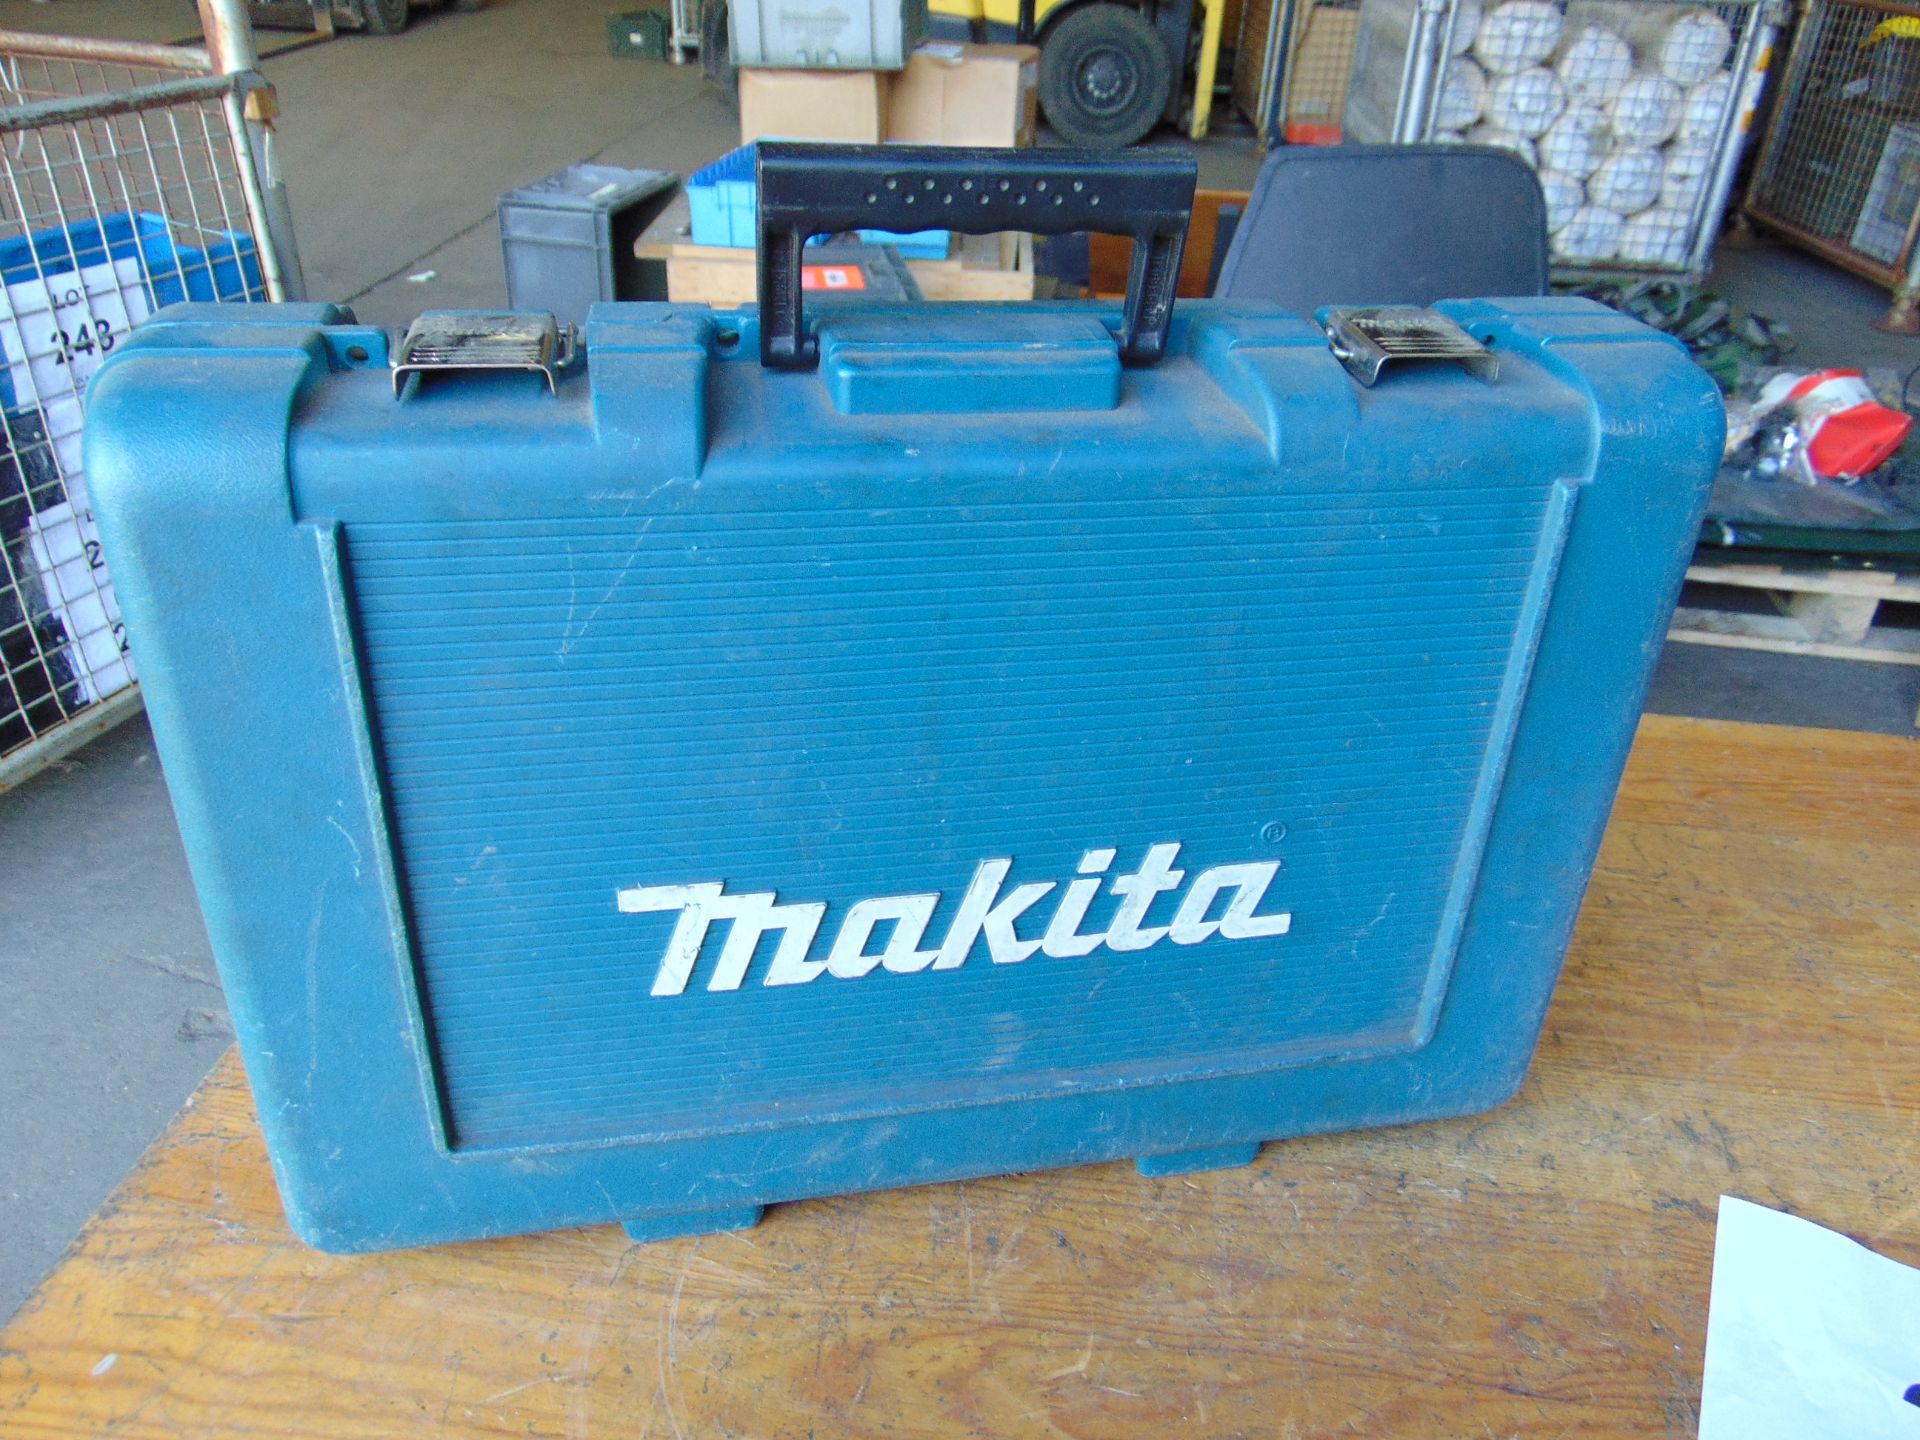 Makita Cordless Power Drill in Hard Case w/ Battery & Charger - Image 3 of 3